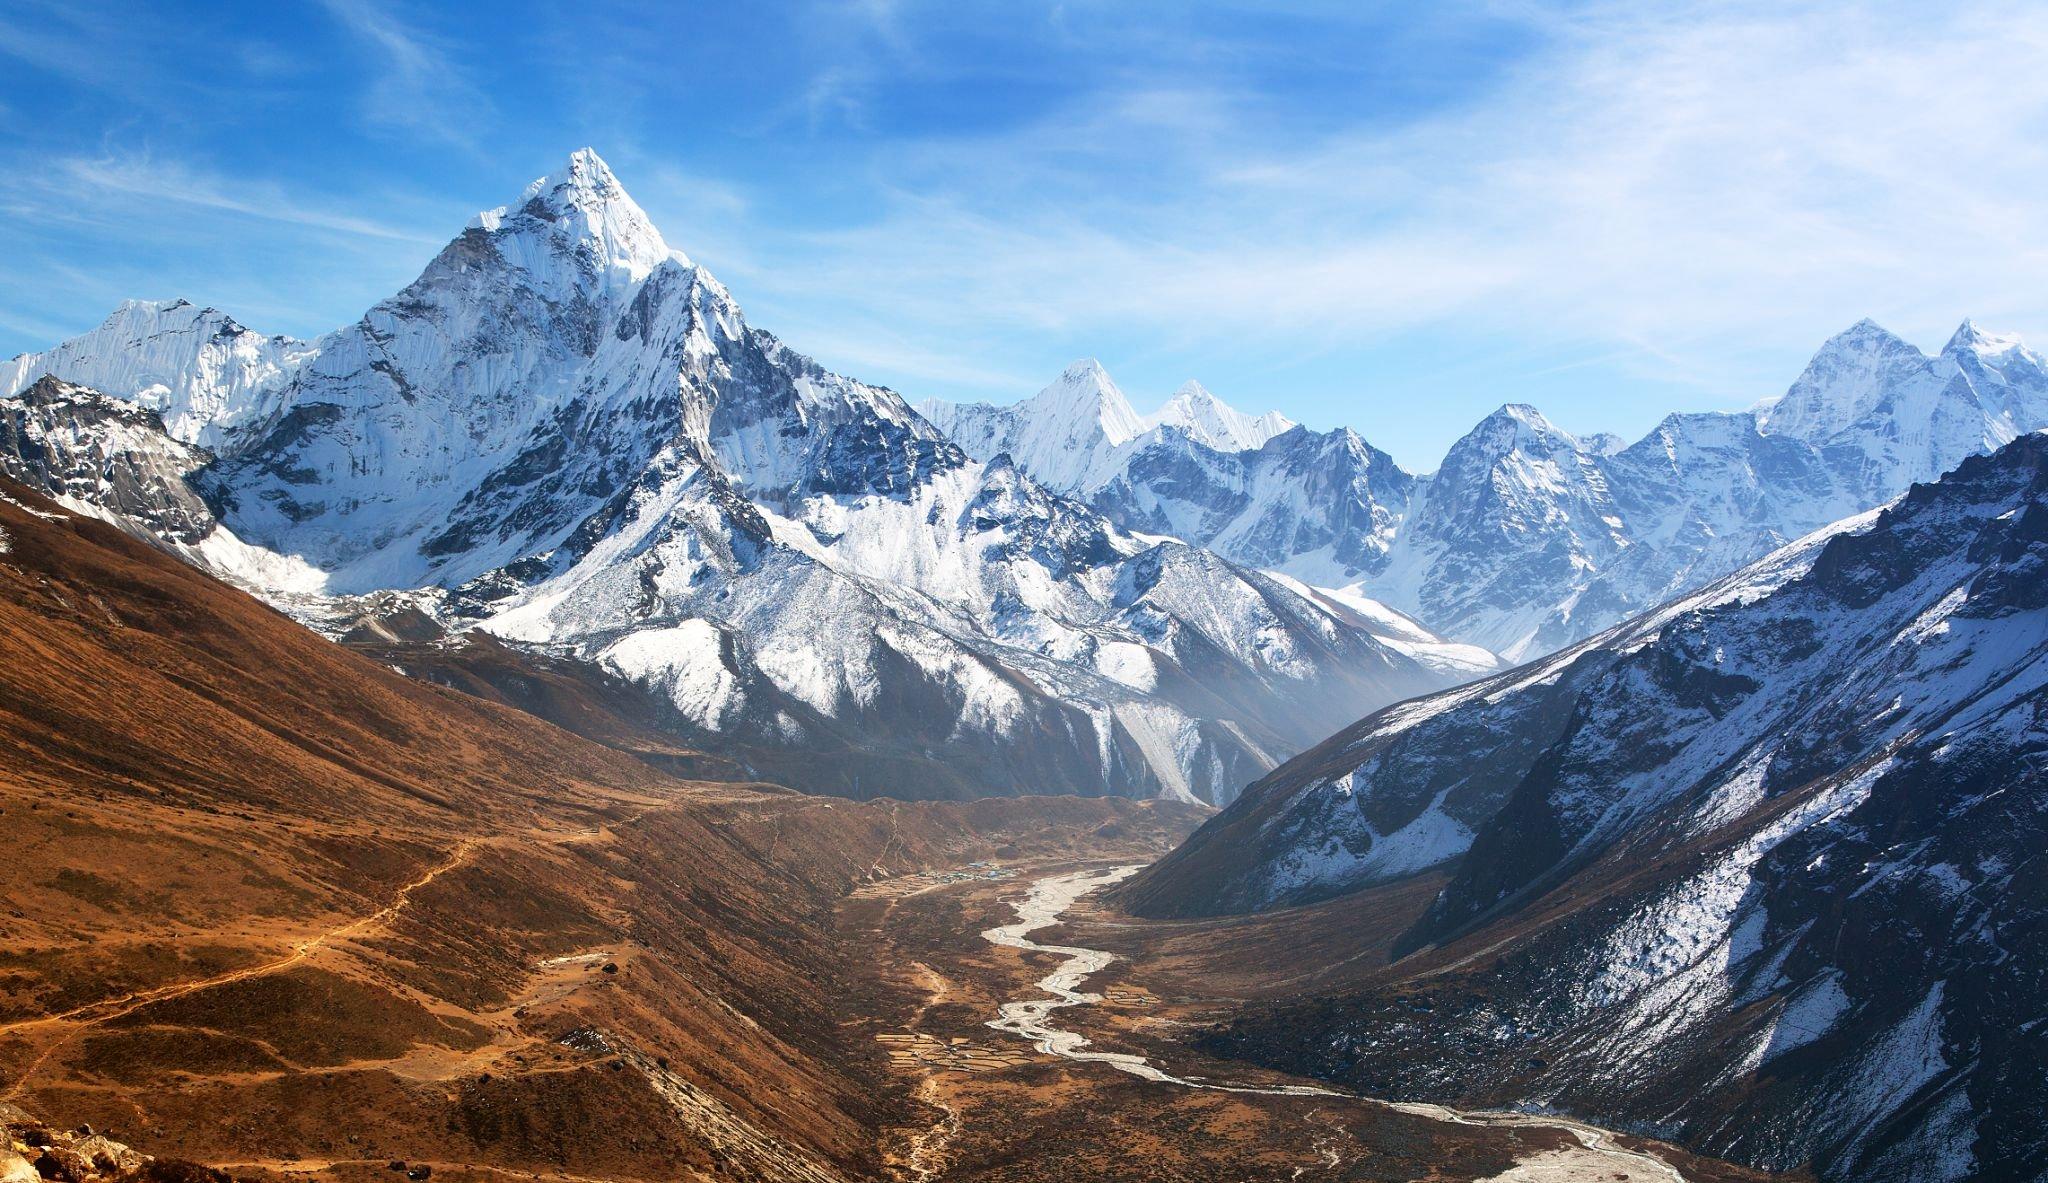 “Budget Travel Tips: How to Explore theHimalayas Affordably”